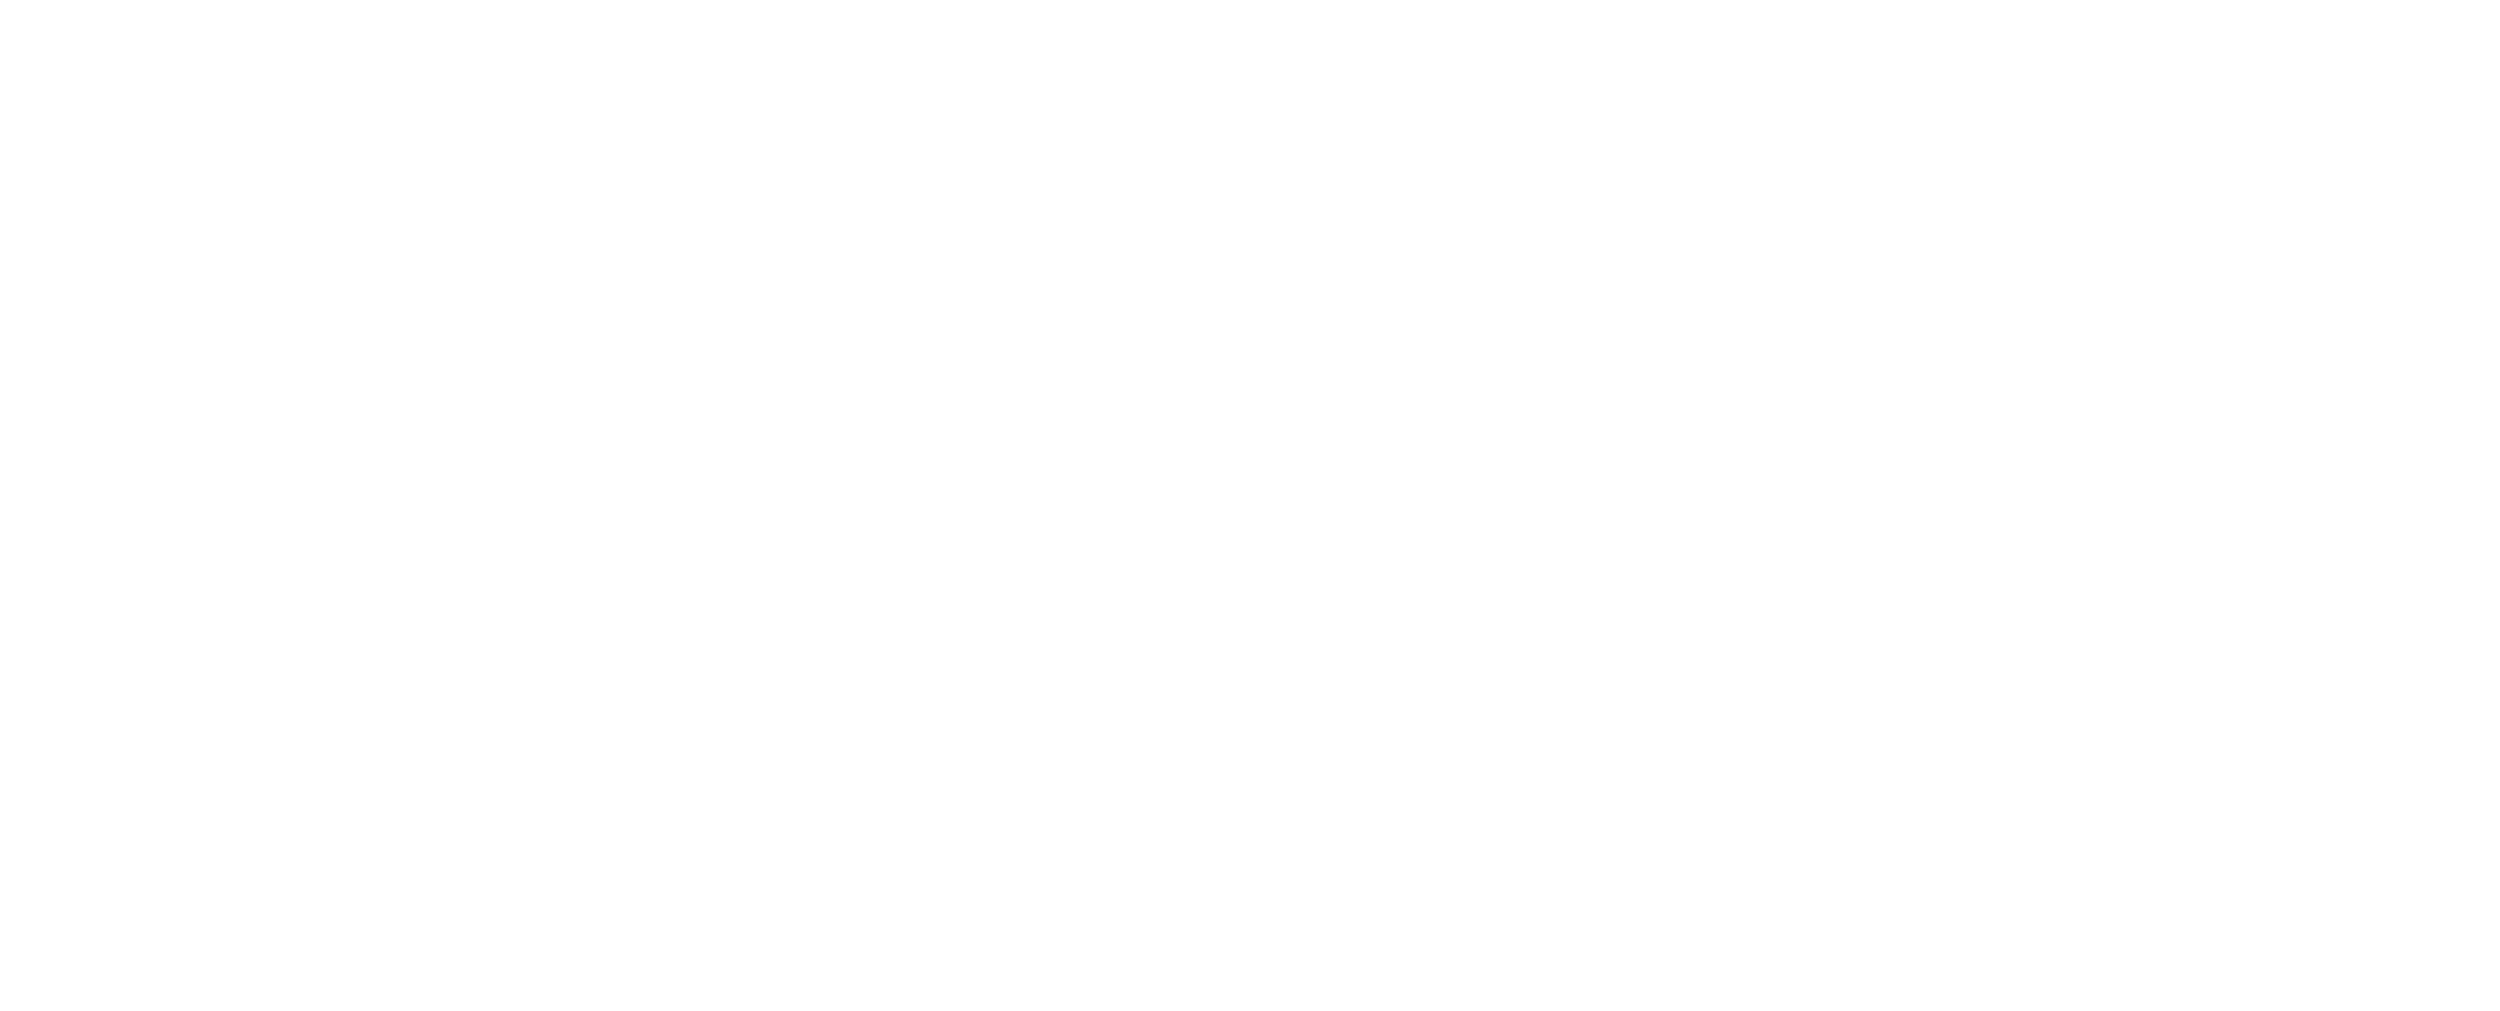 CommonHouse Productions